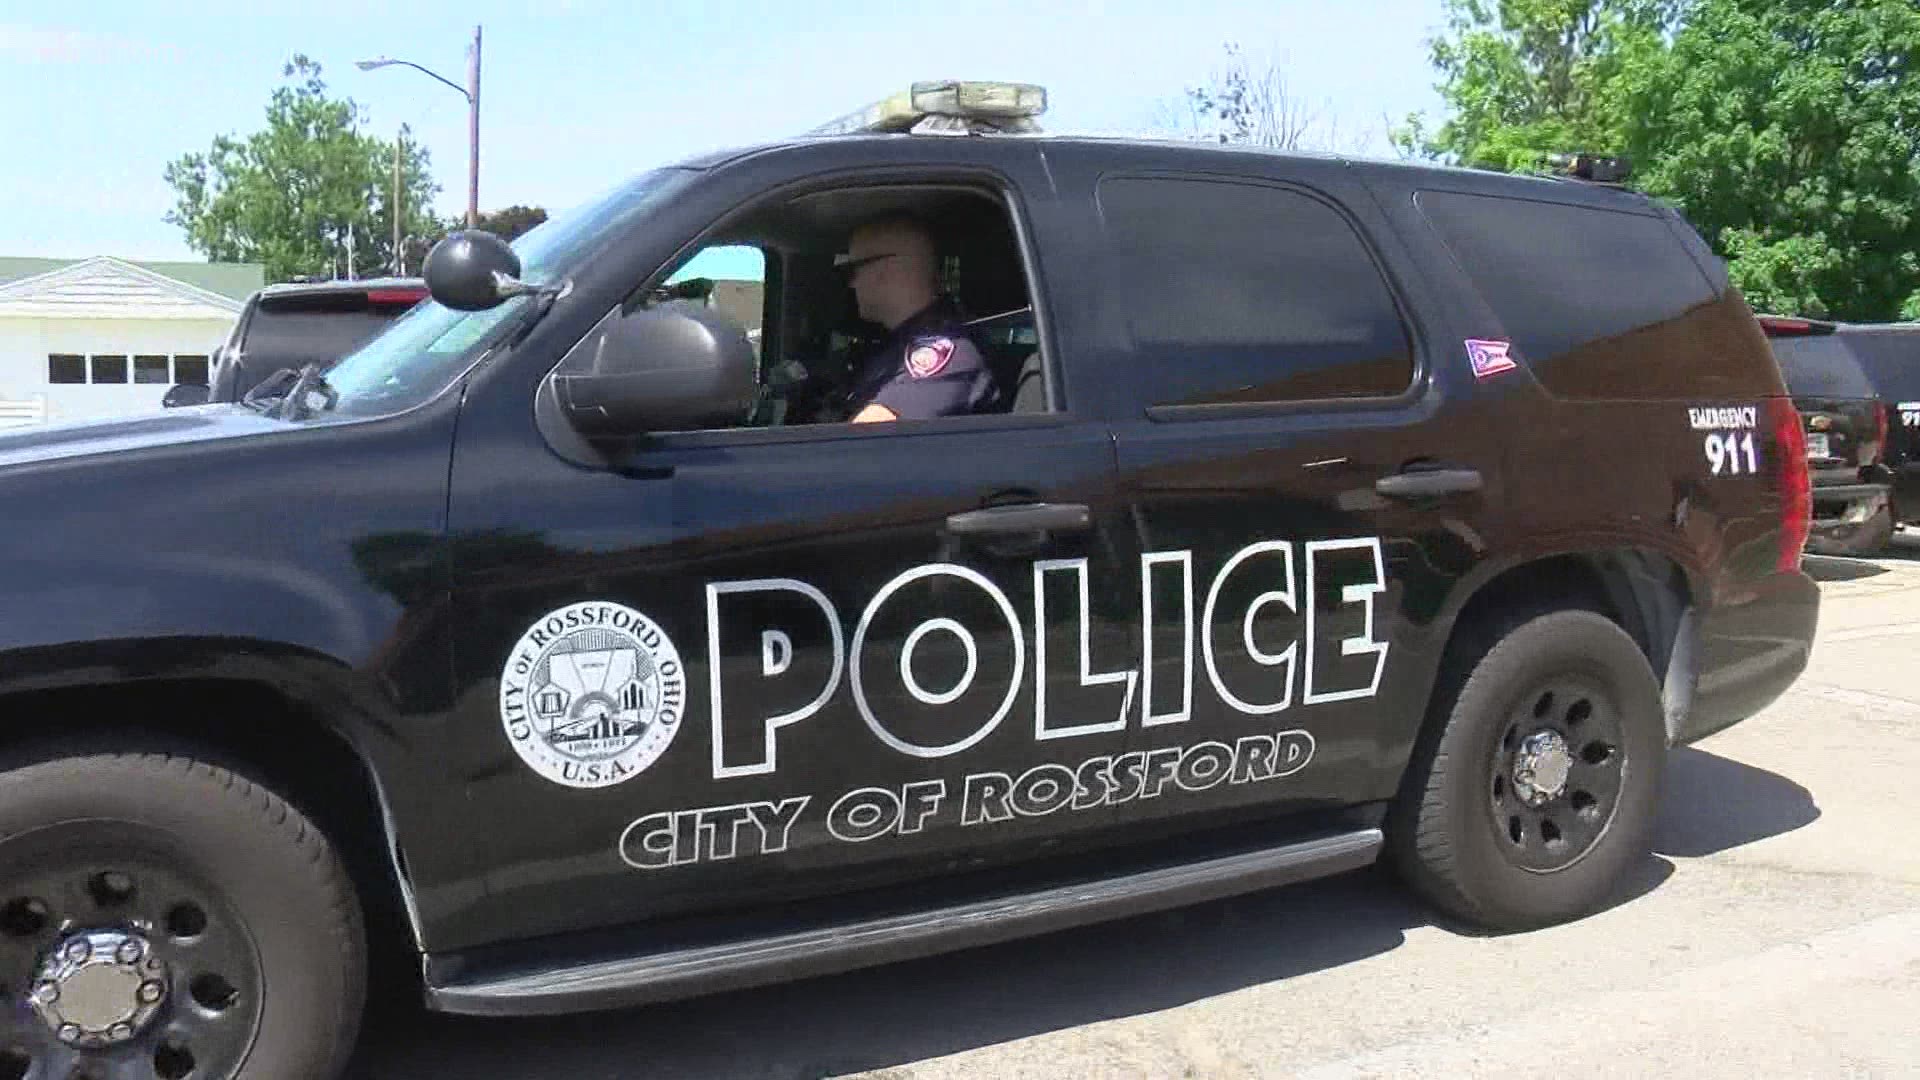 Officer Glenn Goss Jr. resigned before the city completed its investigation, but Rossford's mayor said the city concluded there were grounds for termination.